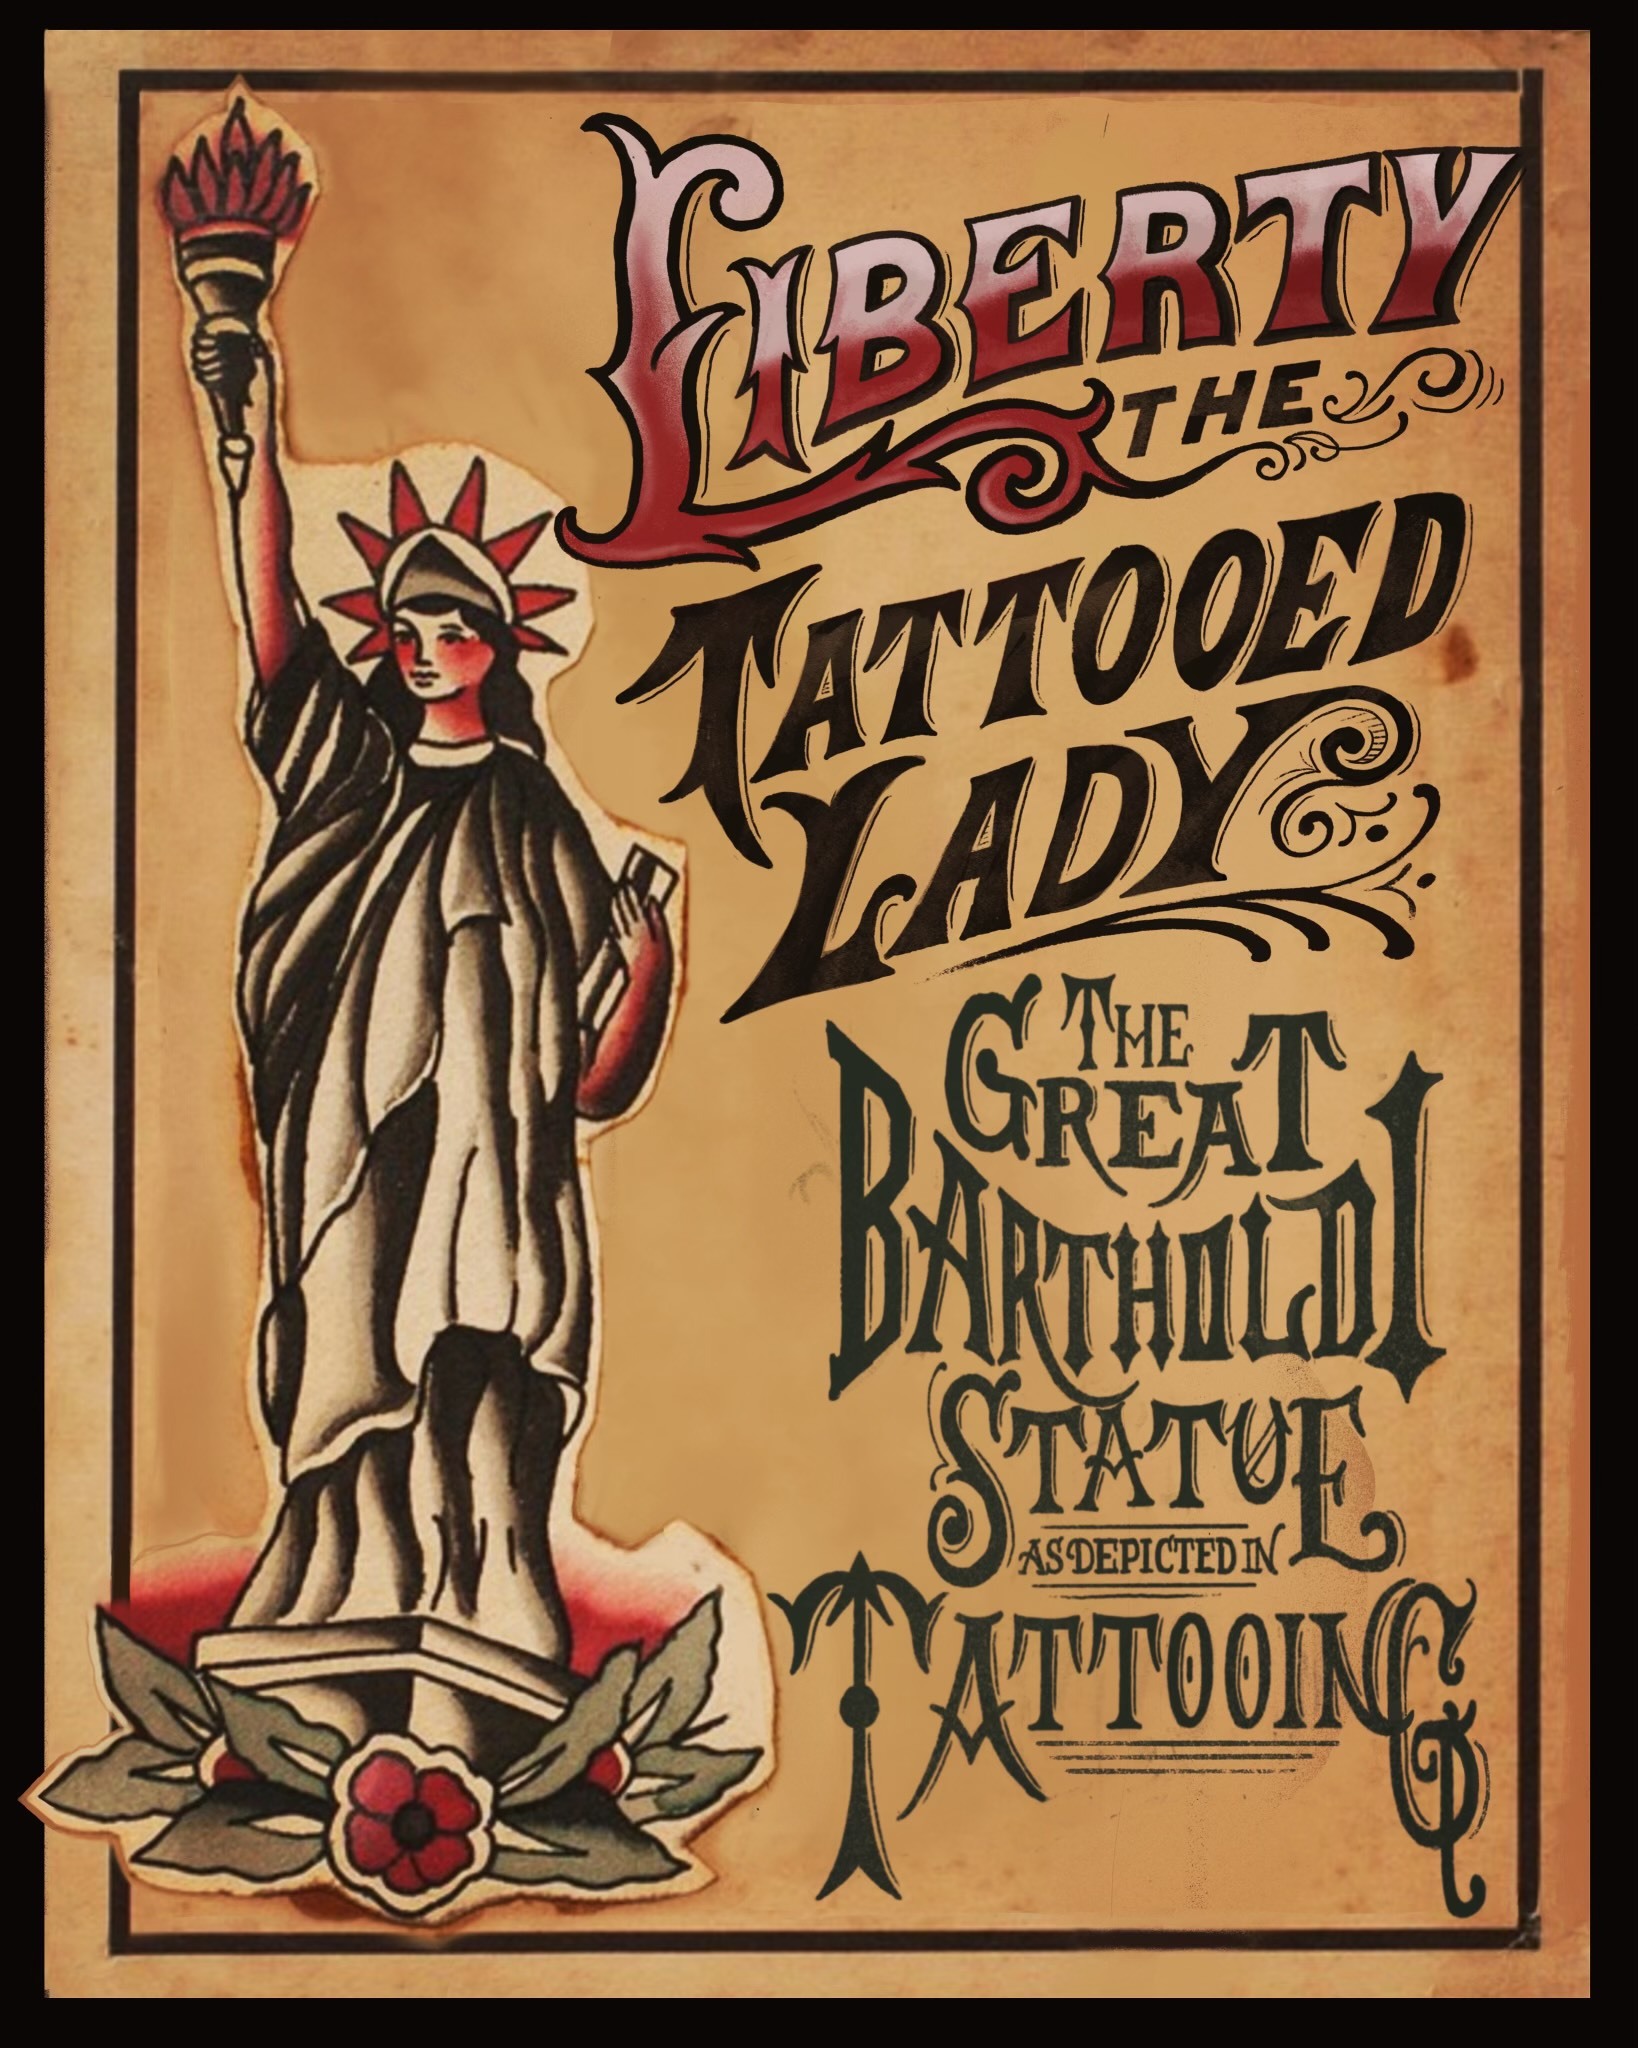 A poster for the show, featuring a tattoo drawing of Lady Liberty.